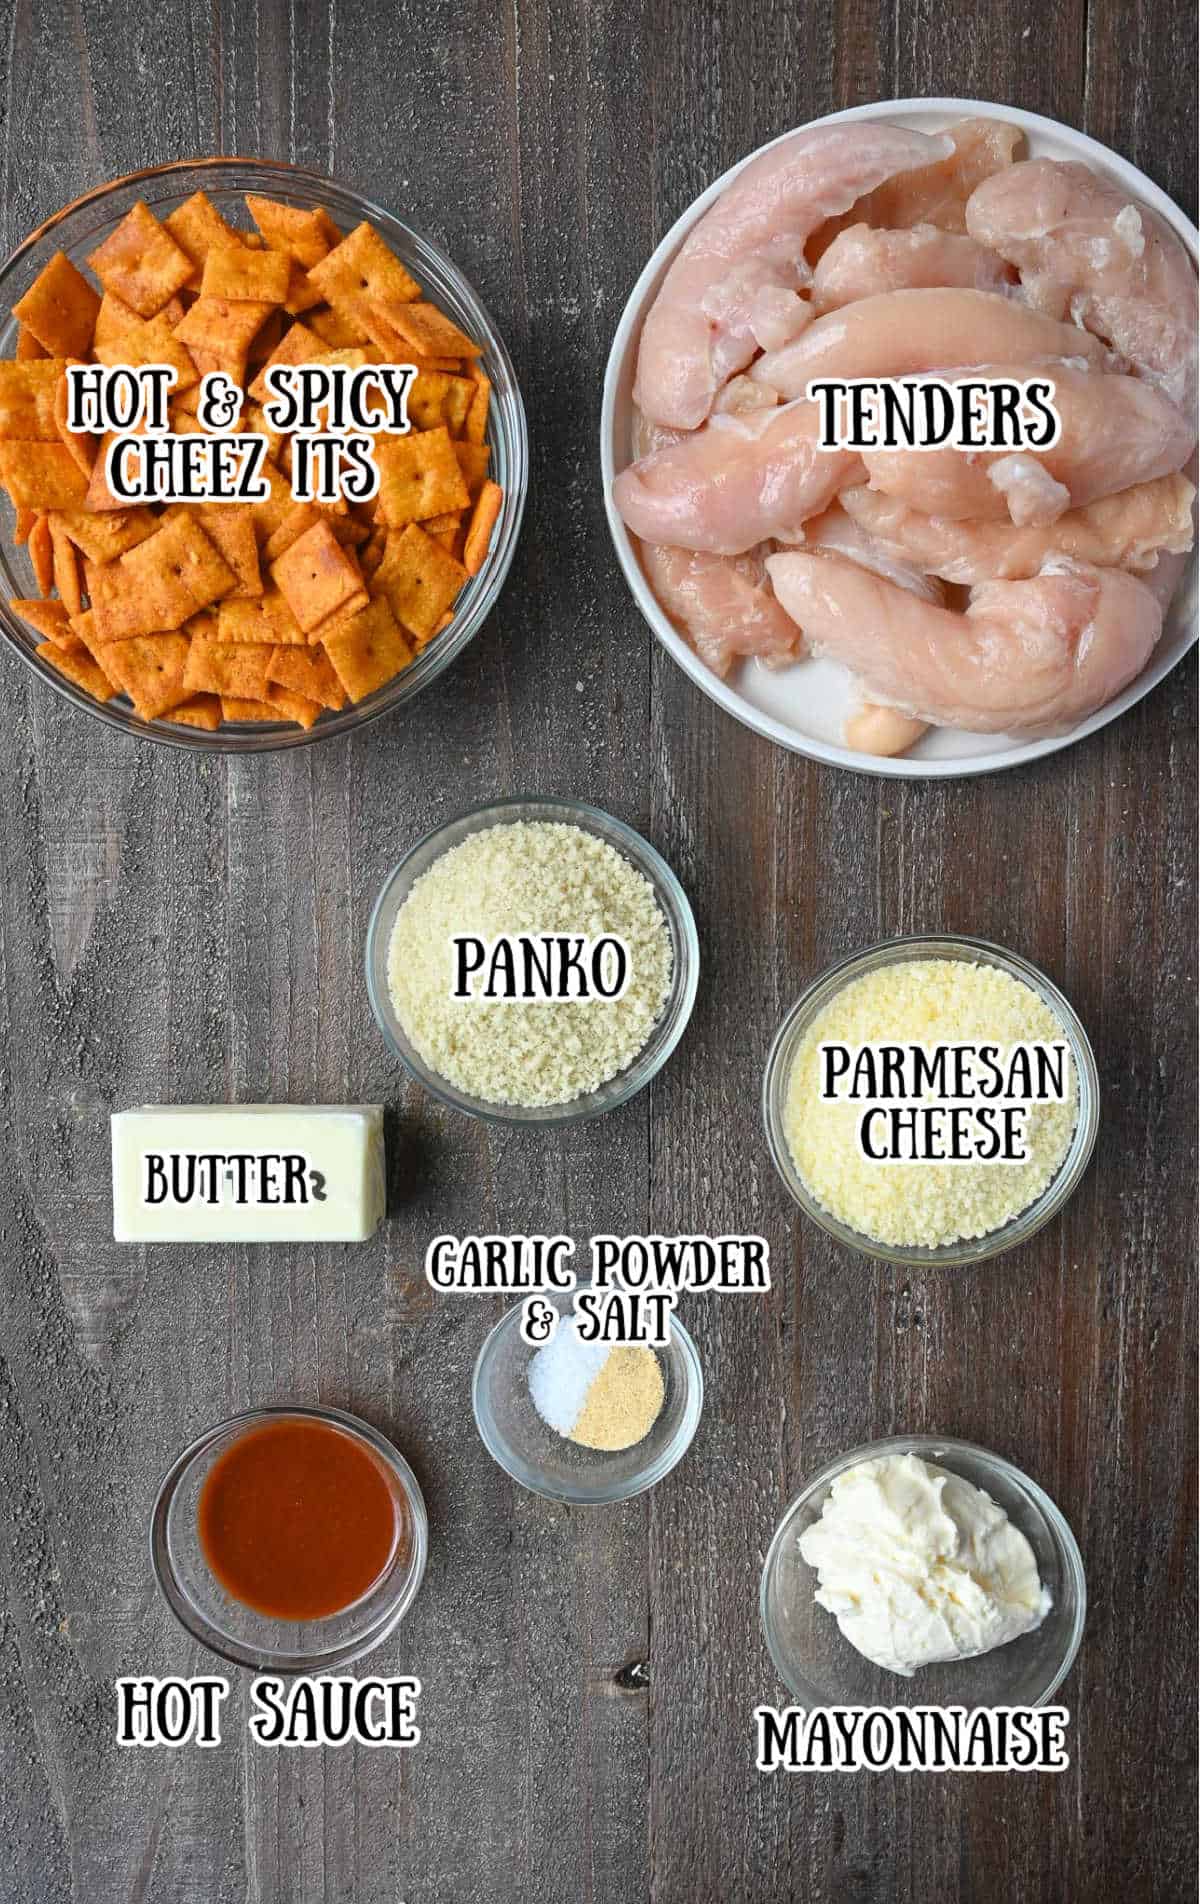 Labelled ingredients for buffalo chicken tenders on a wooden countertop.